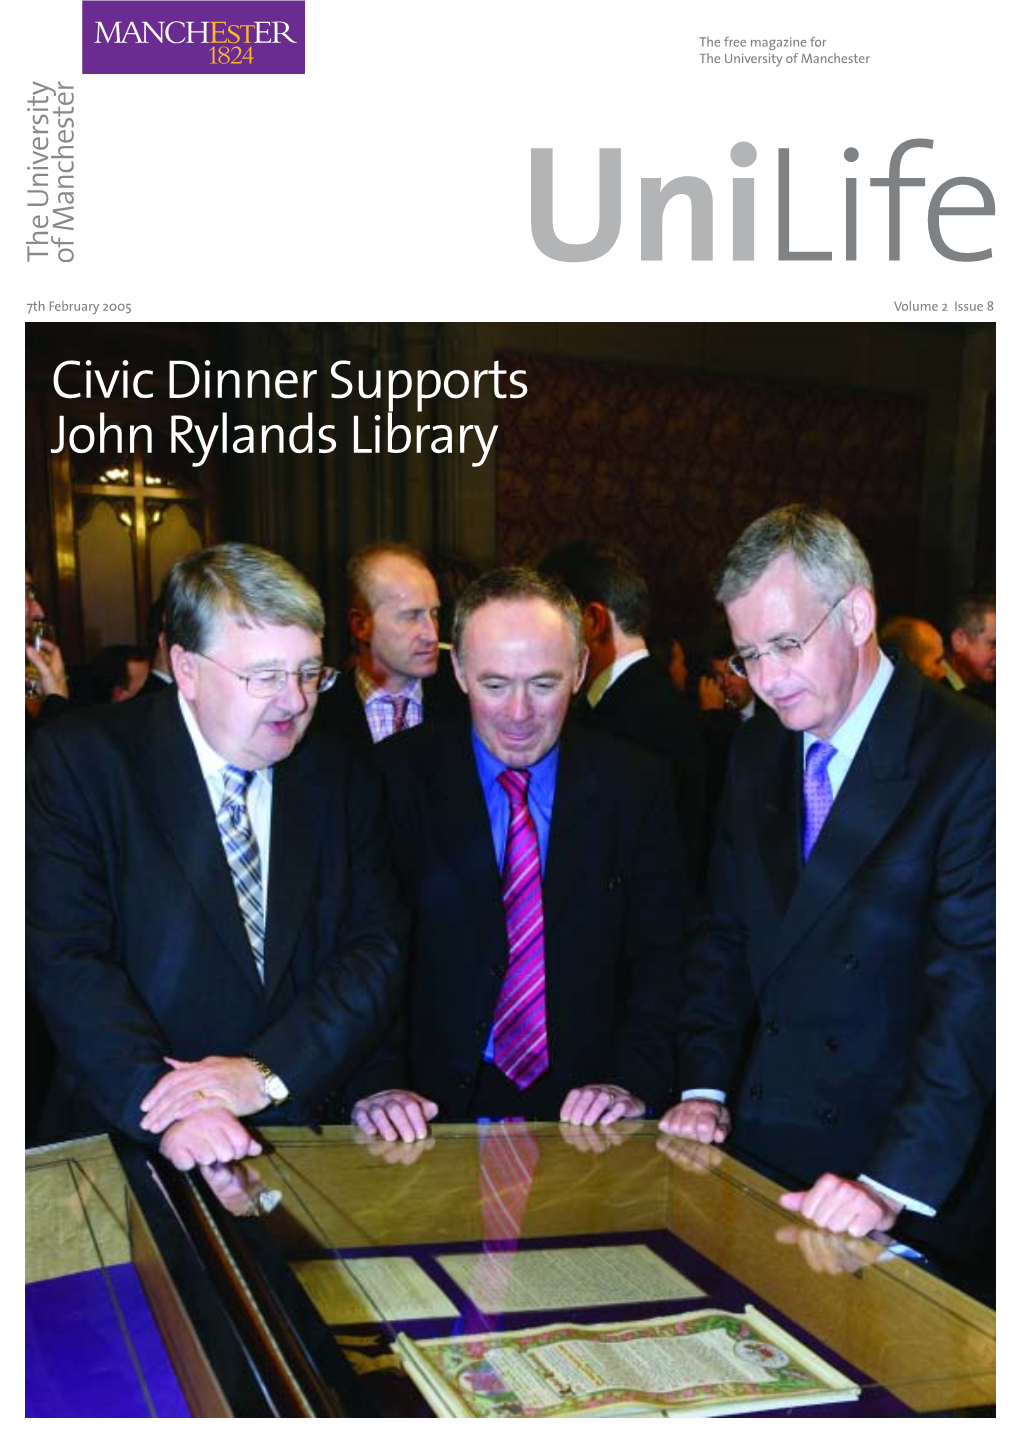 Civic Dinner Supports John Rylands Library 2 Unilife